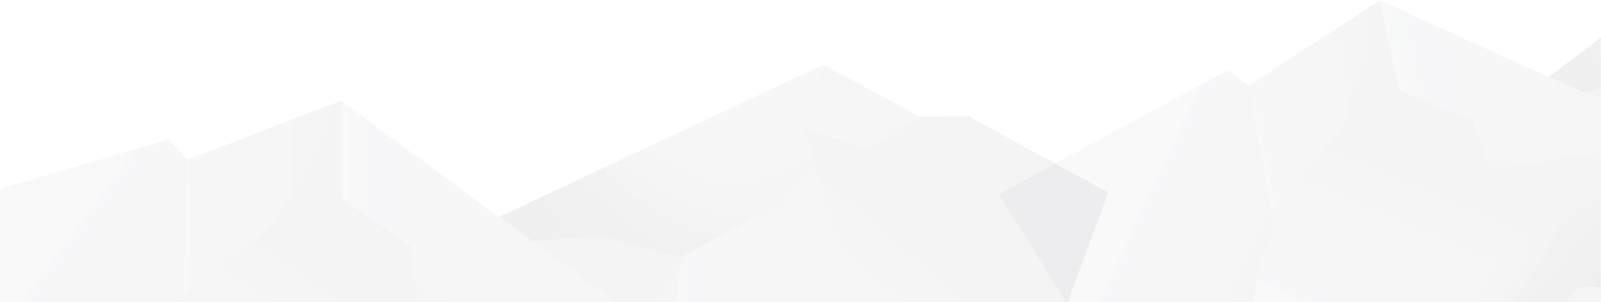 background image of mountains for slider